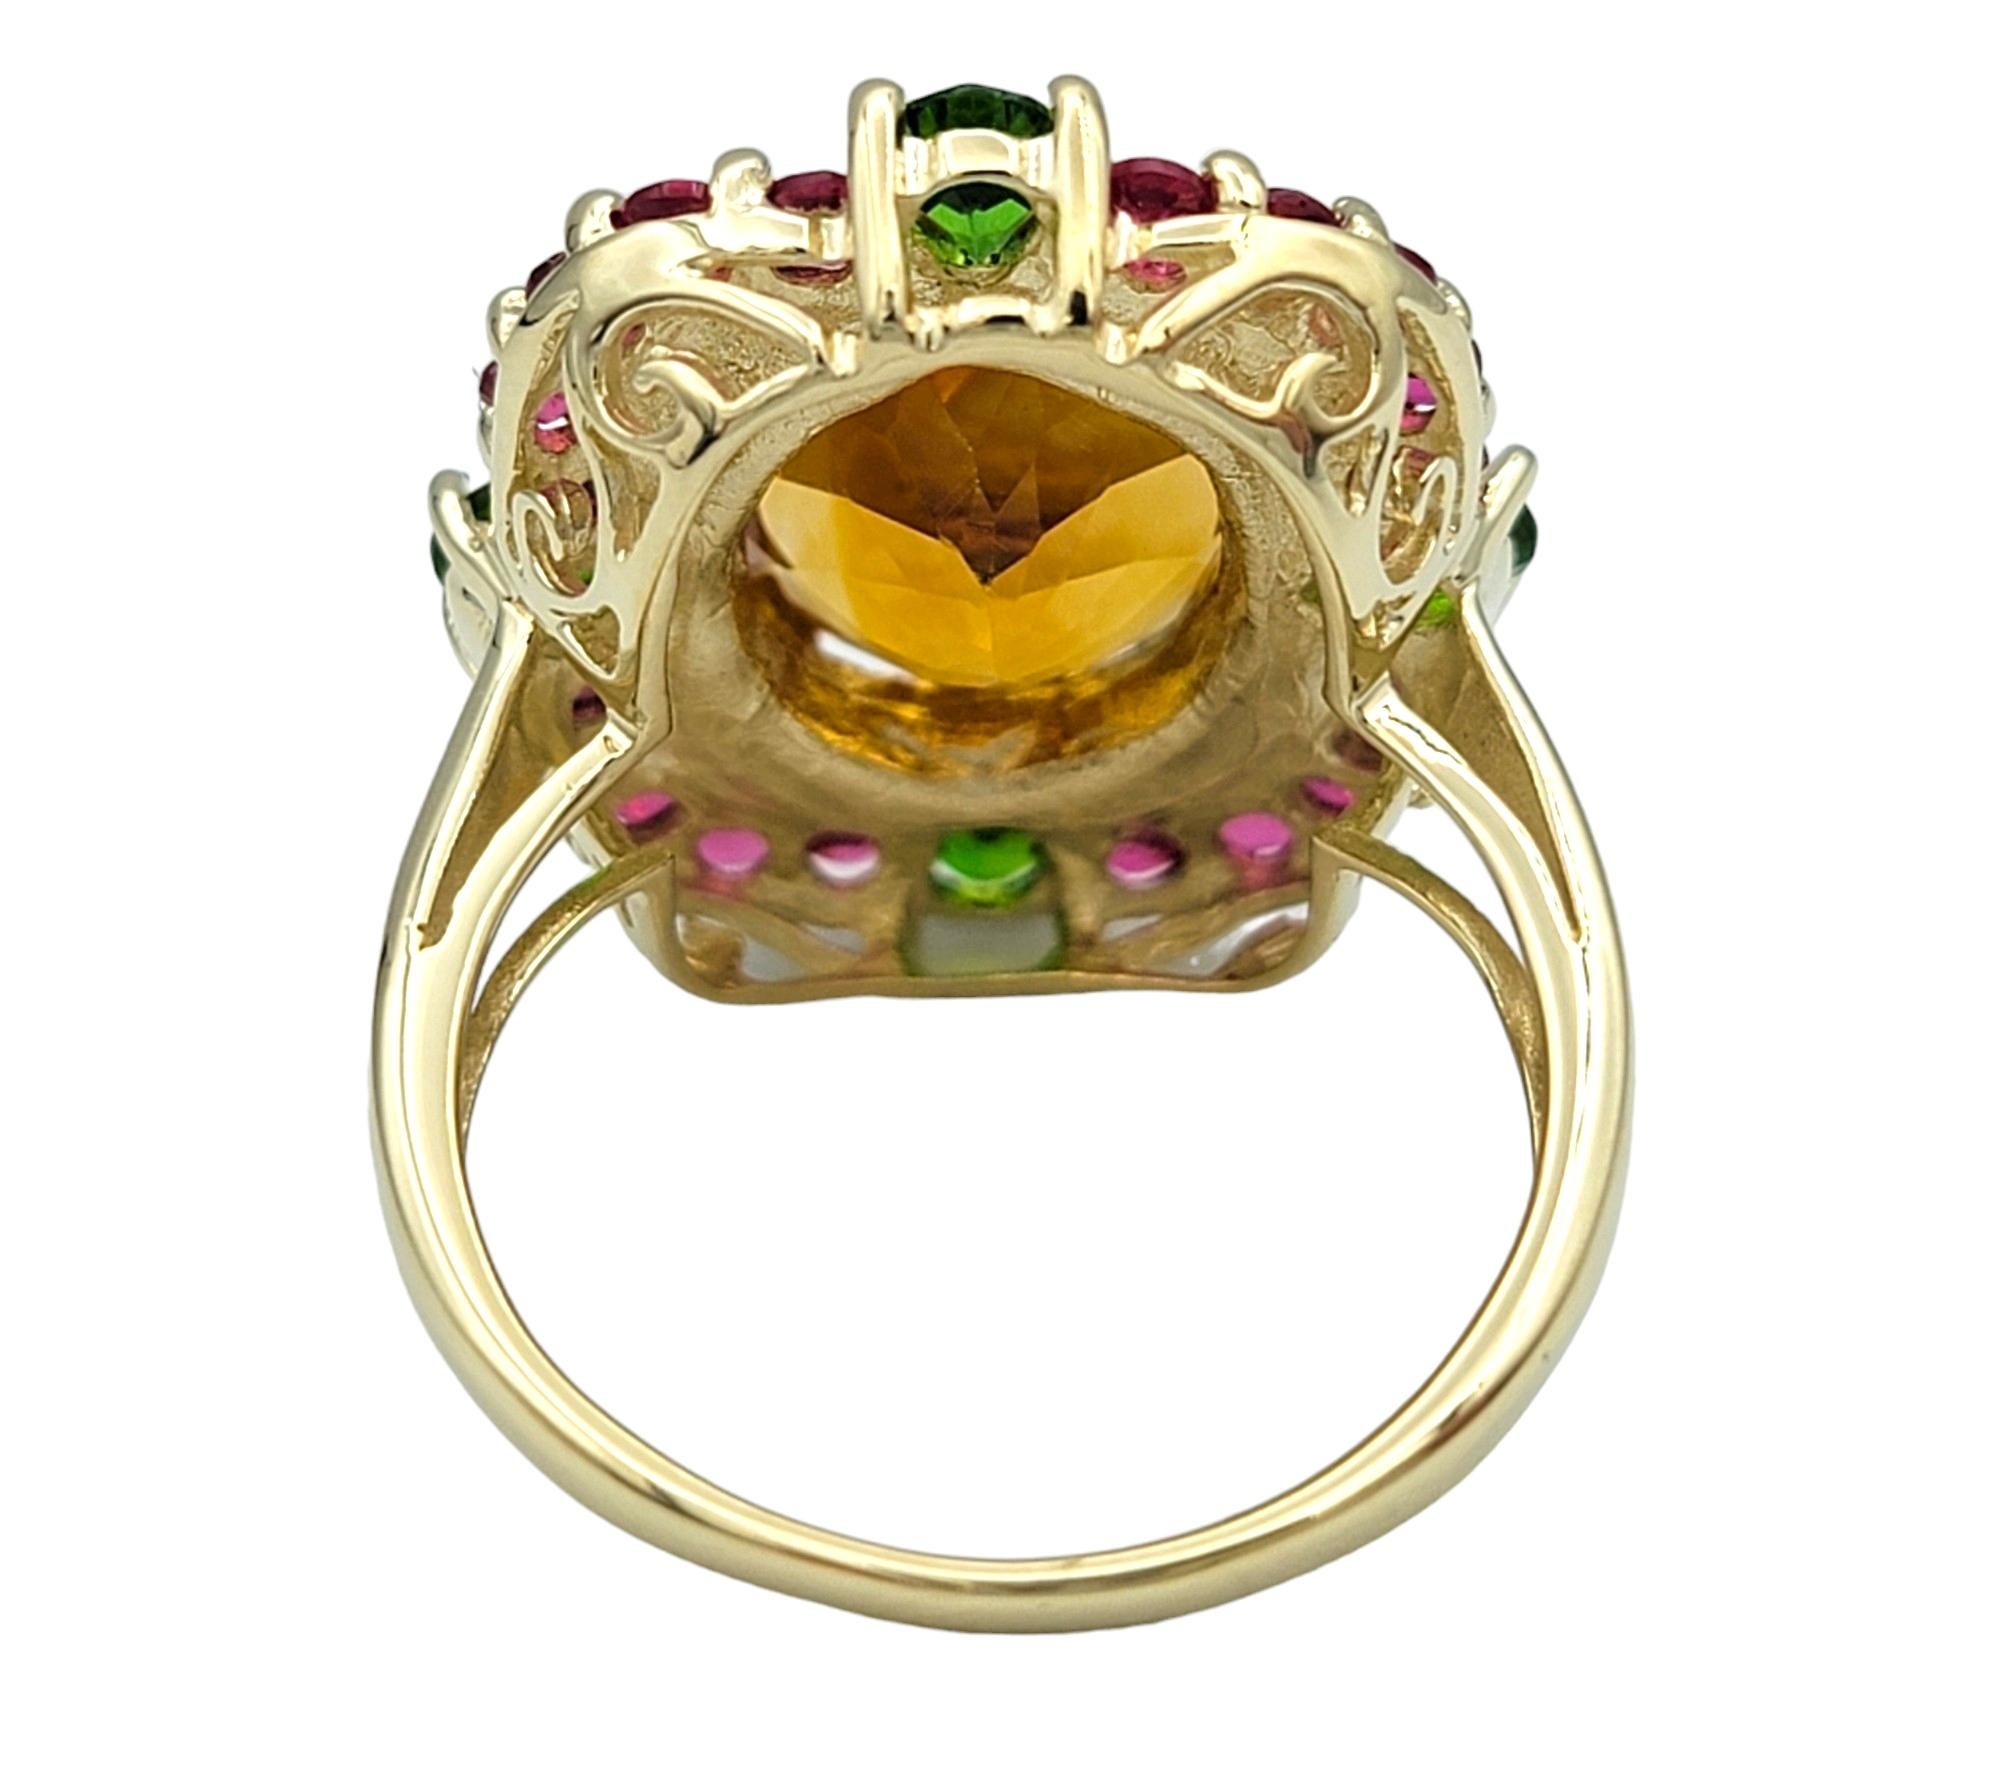 Oval Citrine Cocktail Ring with Rubies and Peridots in 14 Karat Yellow Gold In Good Condition For Sale In Scottsdale, AZ